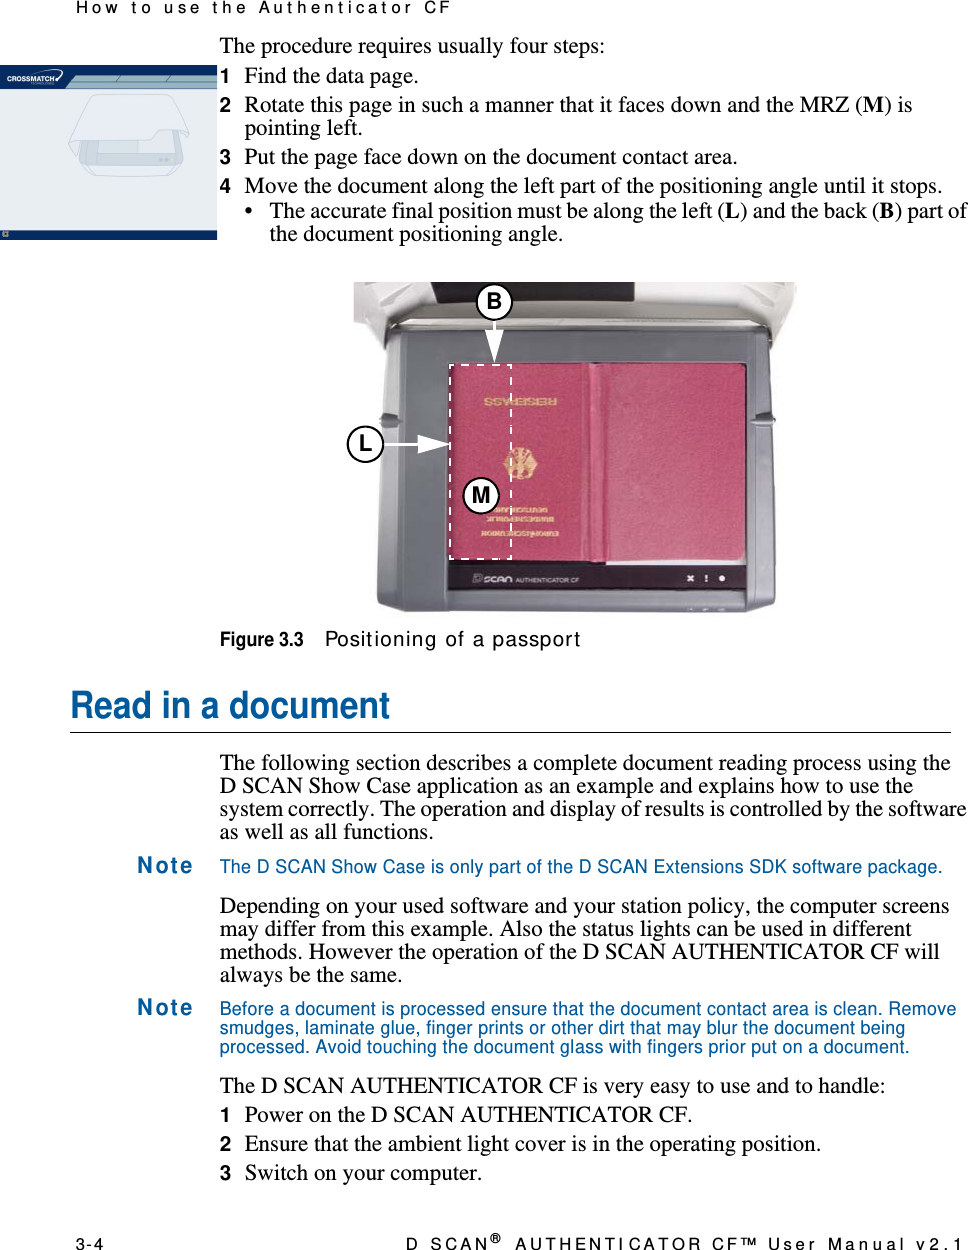 3- 4 D  S C A N ® AUTHENTI CATOR CF™ User Manual v2.1How t o use t he Aut hent icat or CFThe procedure requires usually four steps:1Find the data page.2Rotate this page in such a manner that it faces down and the MRZ (M) is pointing left.3Put the page face down on the document contact area.4Move the document along the left part of the positioning angle until it stops.• The accurate final position must be along the left (L) and the back (B) part of the document positioning angle.Figure 3.3Posit ioning of a passportRead in a documentThe following section describes a complete document reading process using the D SCAN Show Case application as an example and explains how to use the system correctly. The operation and display of results is controlled by the software as well as all functions.N ot eThe D SCAN Show Case is only part of the D SCAN Extensions SDK software package.Depending on your used software and your station policy, the computer screens may differ from this example. Also the status lights can be used in different methods. However the operation of the D SCAN AUTHENTICATOR CF will always be the same.N ot eBefore a document is processed ensure that the document contact area is clean. Remove smudges, laminate glue, finger prints or other dirt that may blur the document being processed. Avoid touching the document glass with fingers prior put on a document.The D SCAN AUTHENTICATOR CF is very easy to use and to handle:1Power on the D SCAN AUTHENTICATOR CF.2Ensure that the ambient light cover is in the operating position.3Switch on your computer.LBM